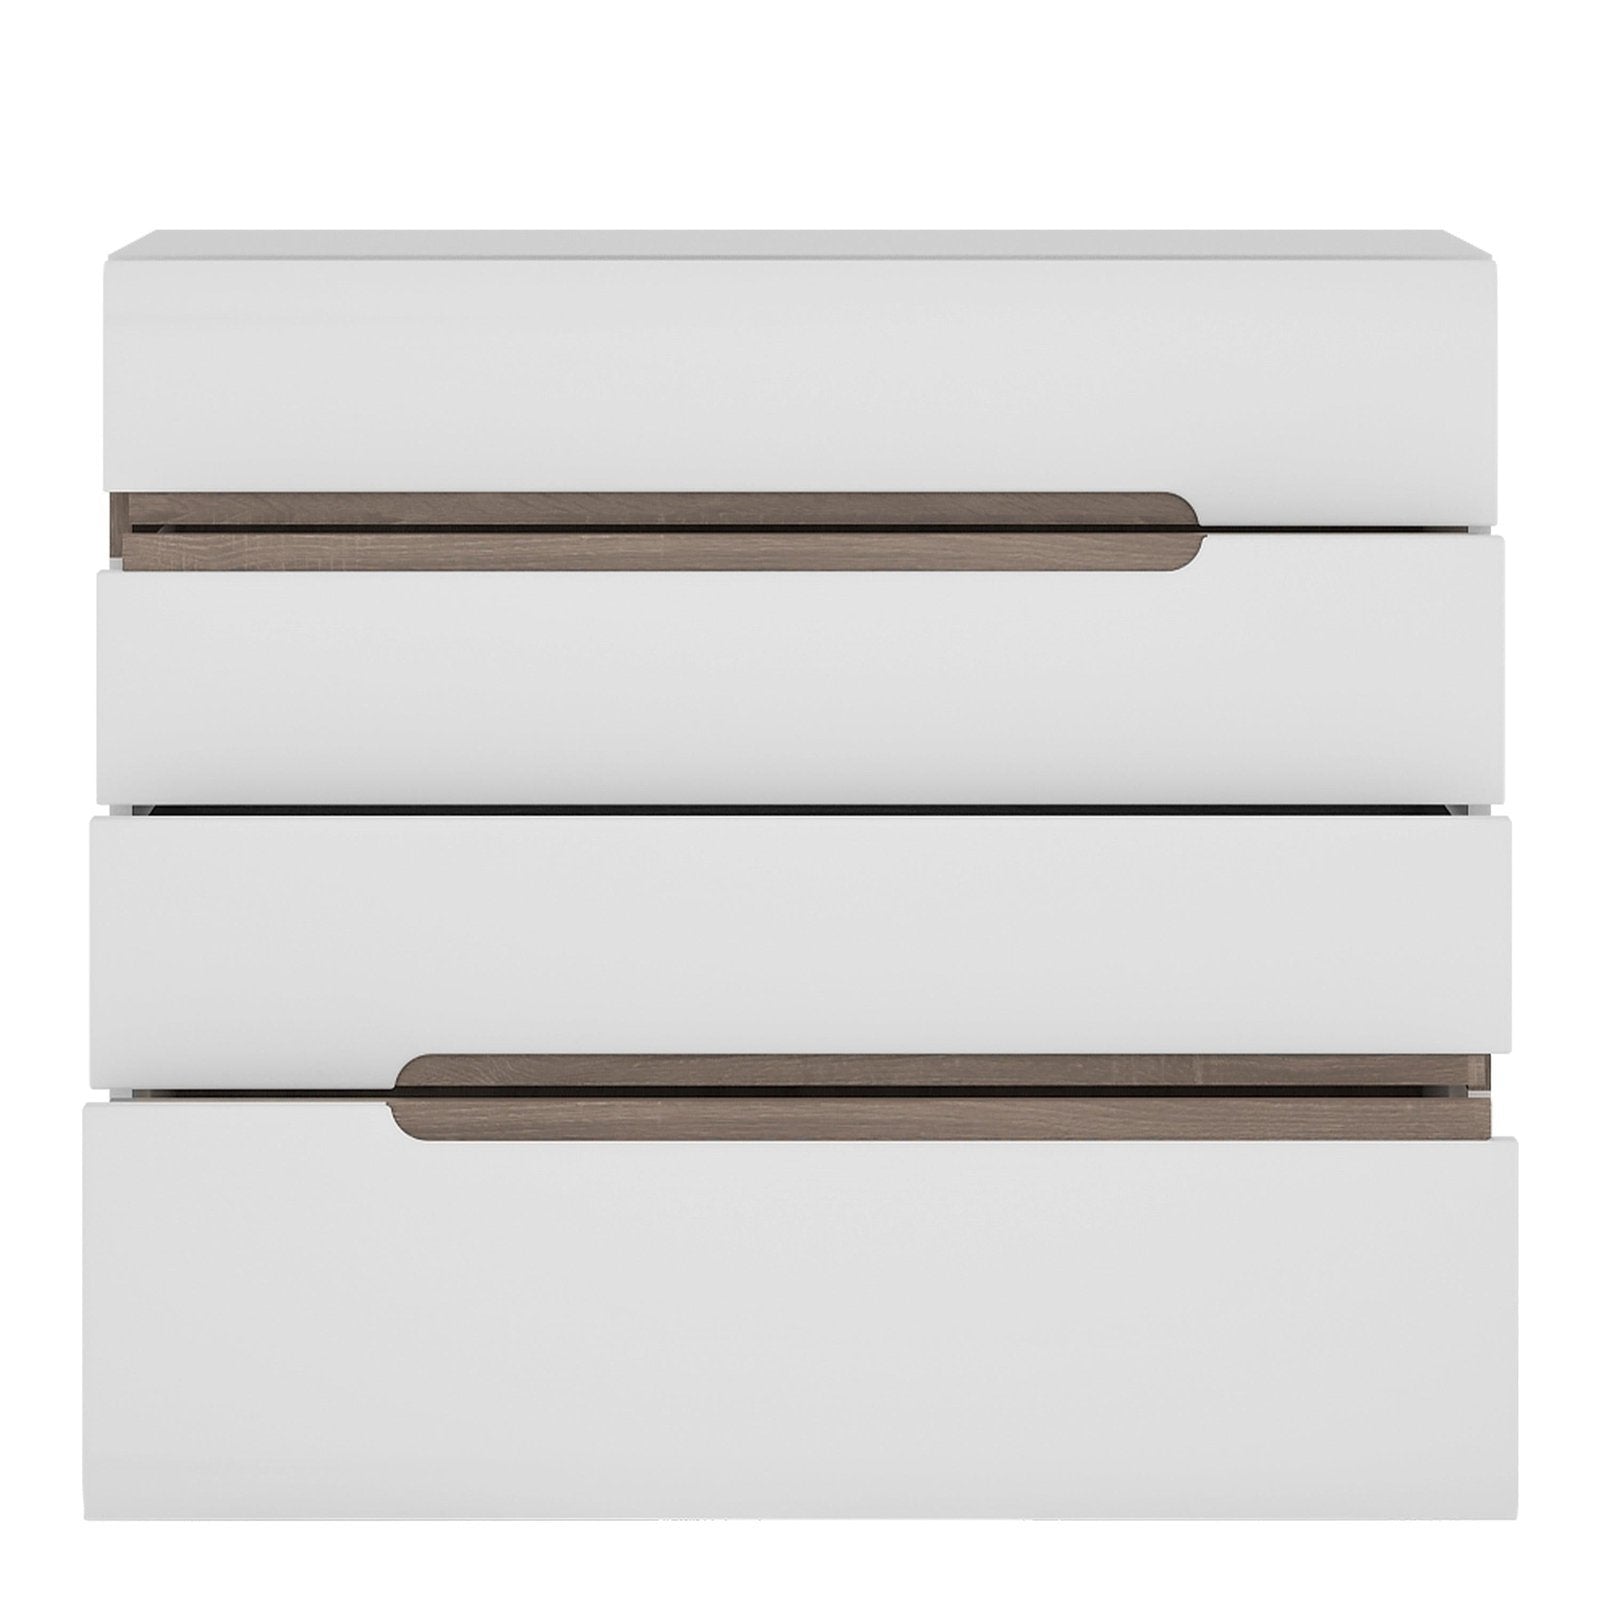 Chelsea 4 Drawer Chest in White with Oak Trim